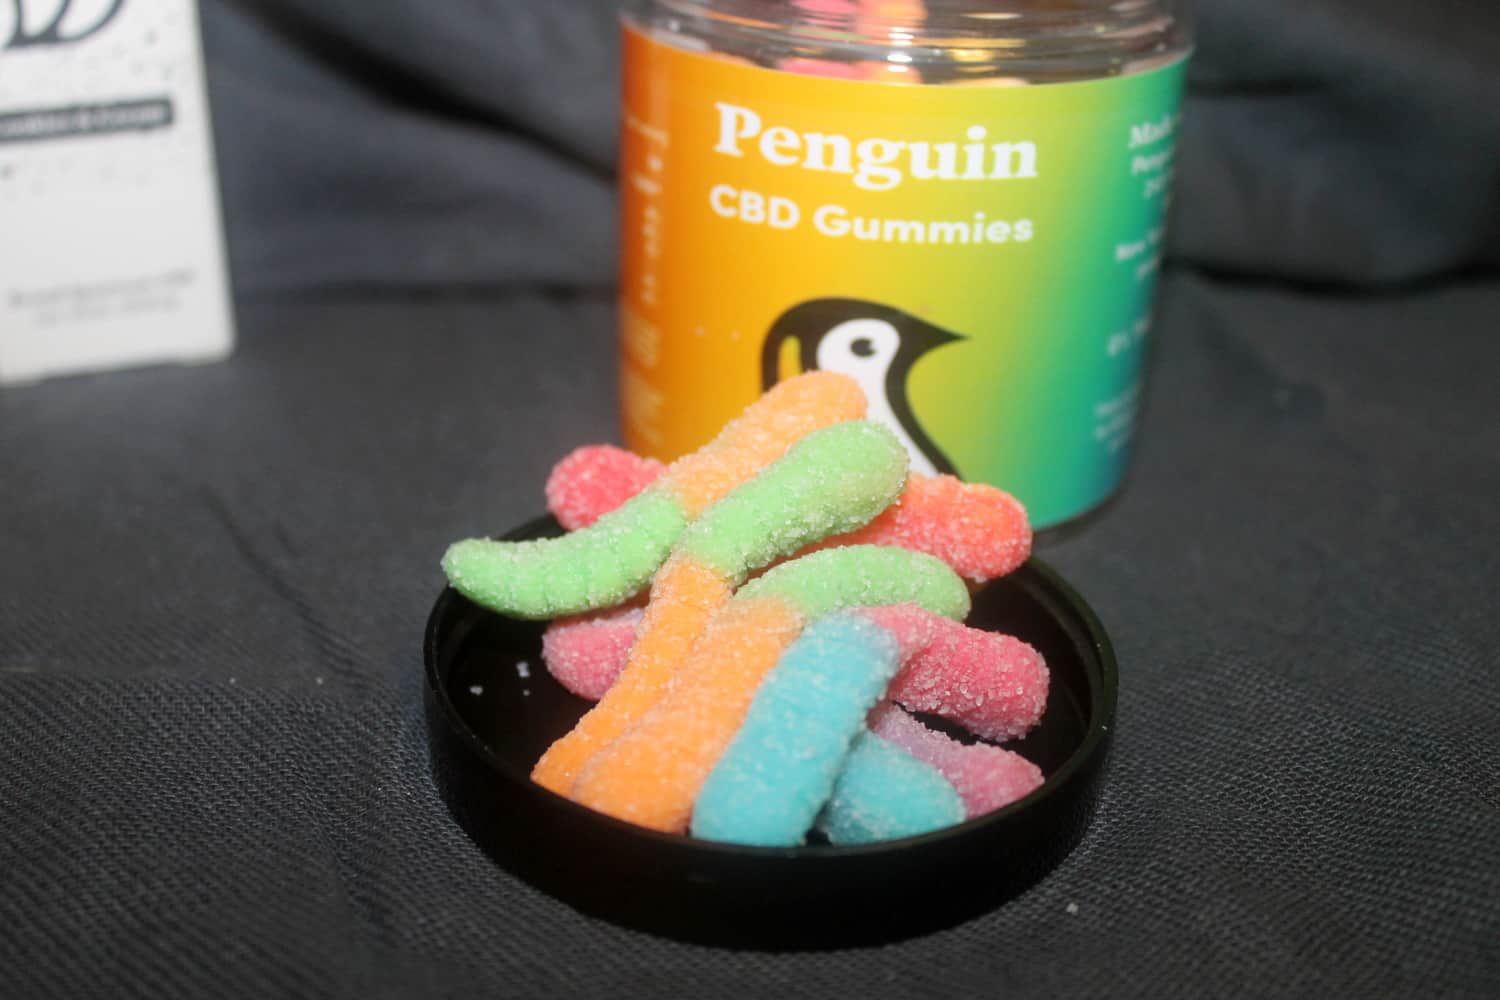 What makes Penguin CBD oil stand out from a sea of CBD brands? I tried out two of their edible products- gummies and sublingual oil- to find out. Read on for my full review.